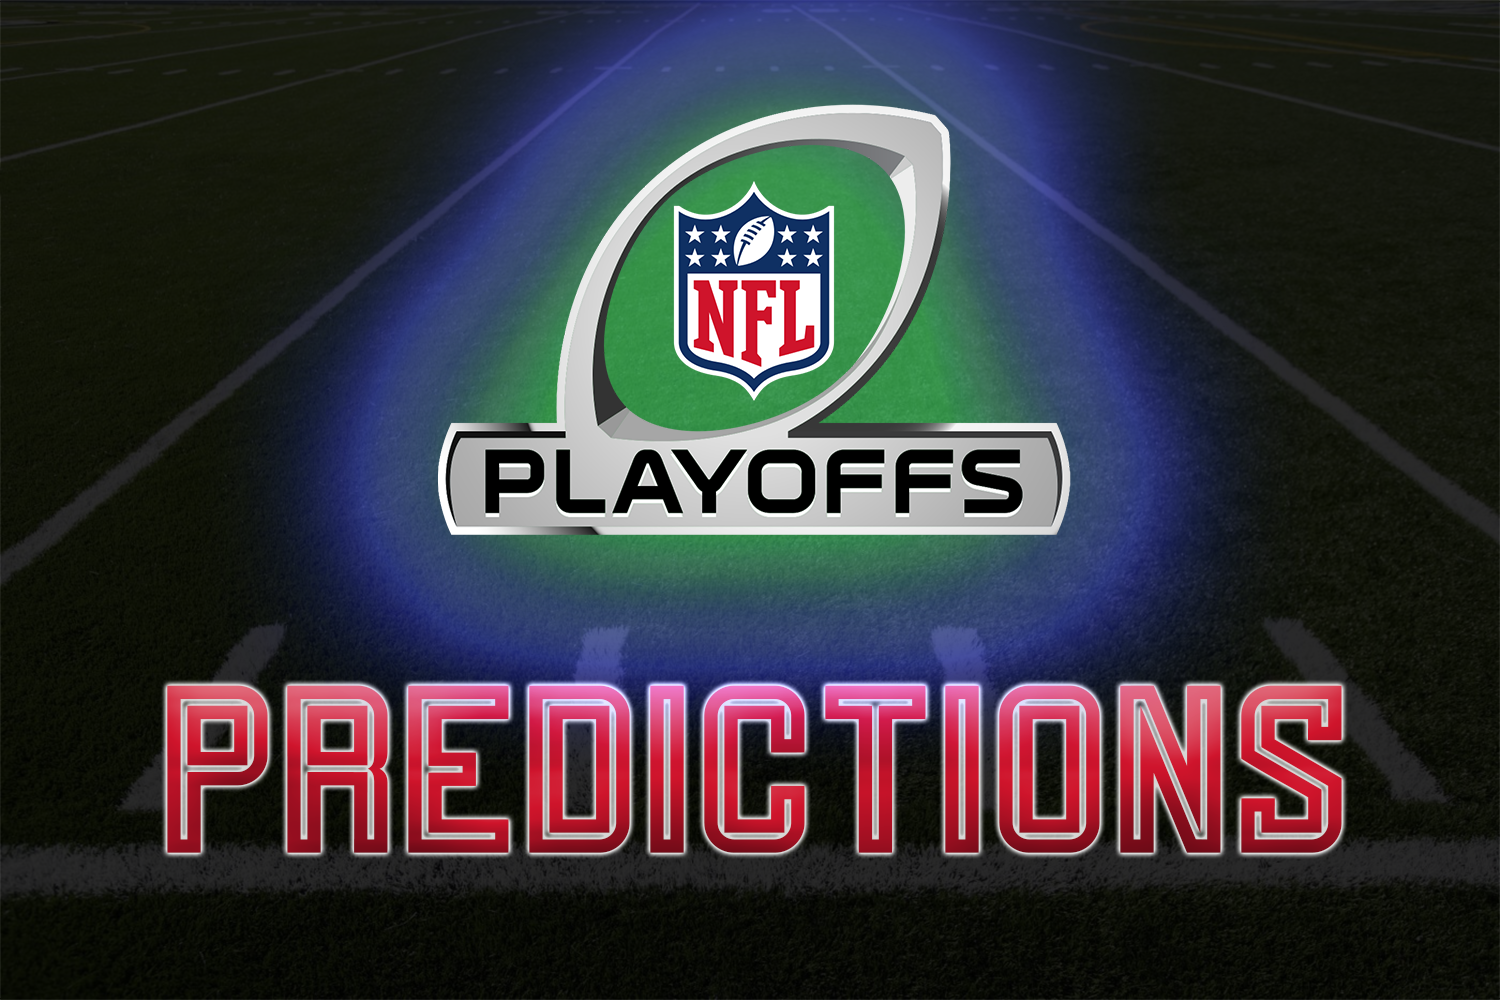 The Lance's NFL Playoff Predictions – The Lance